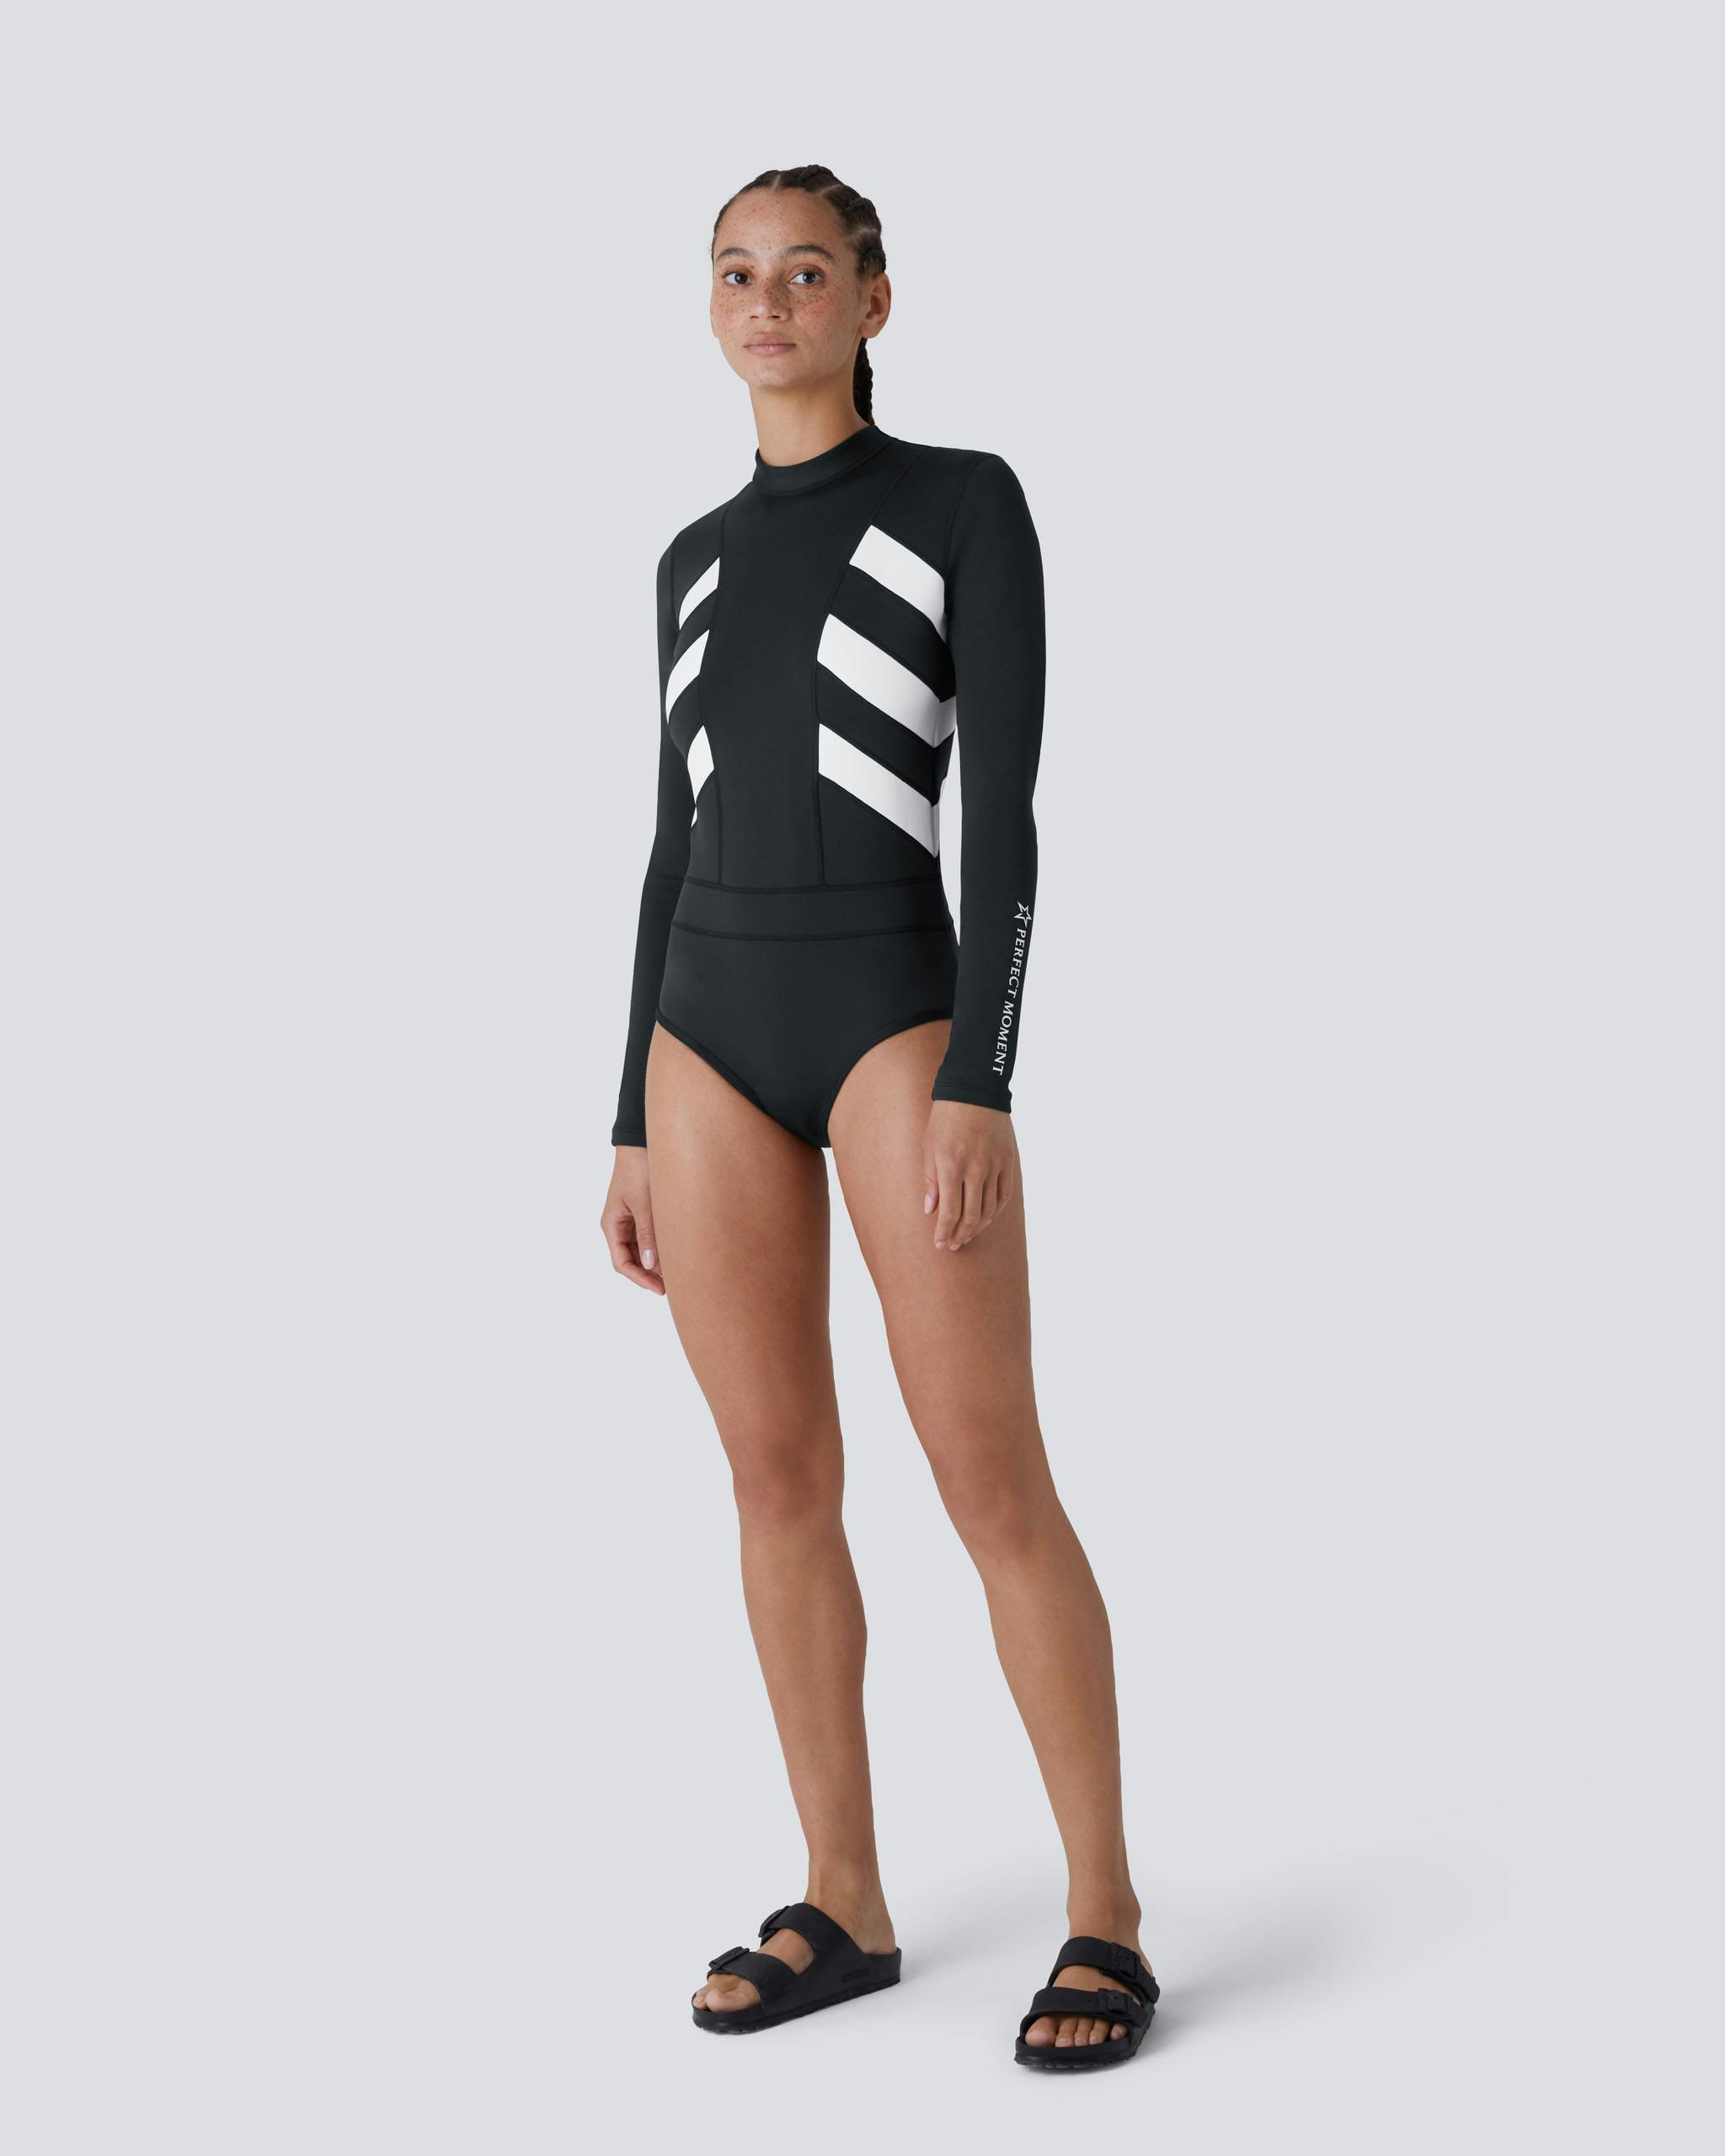 Imok Wetsuit 1